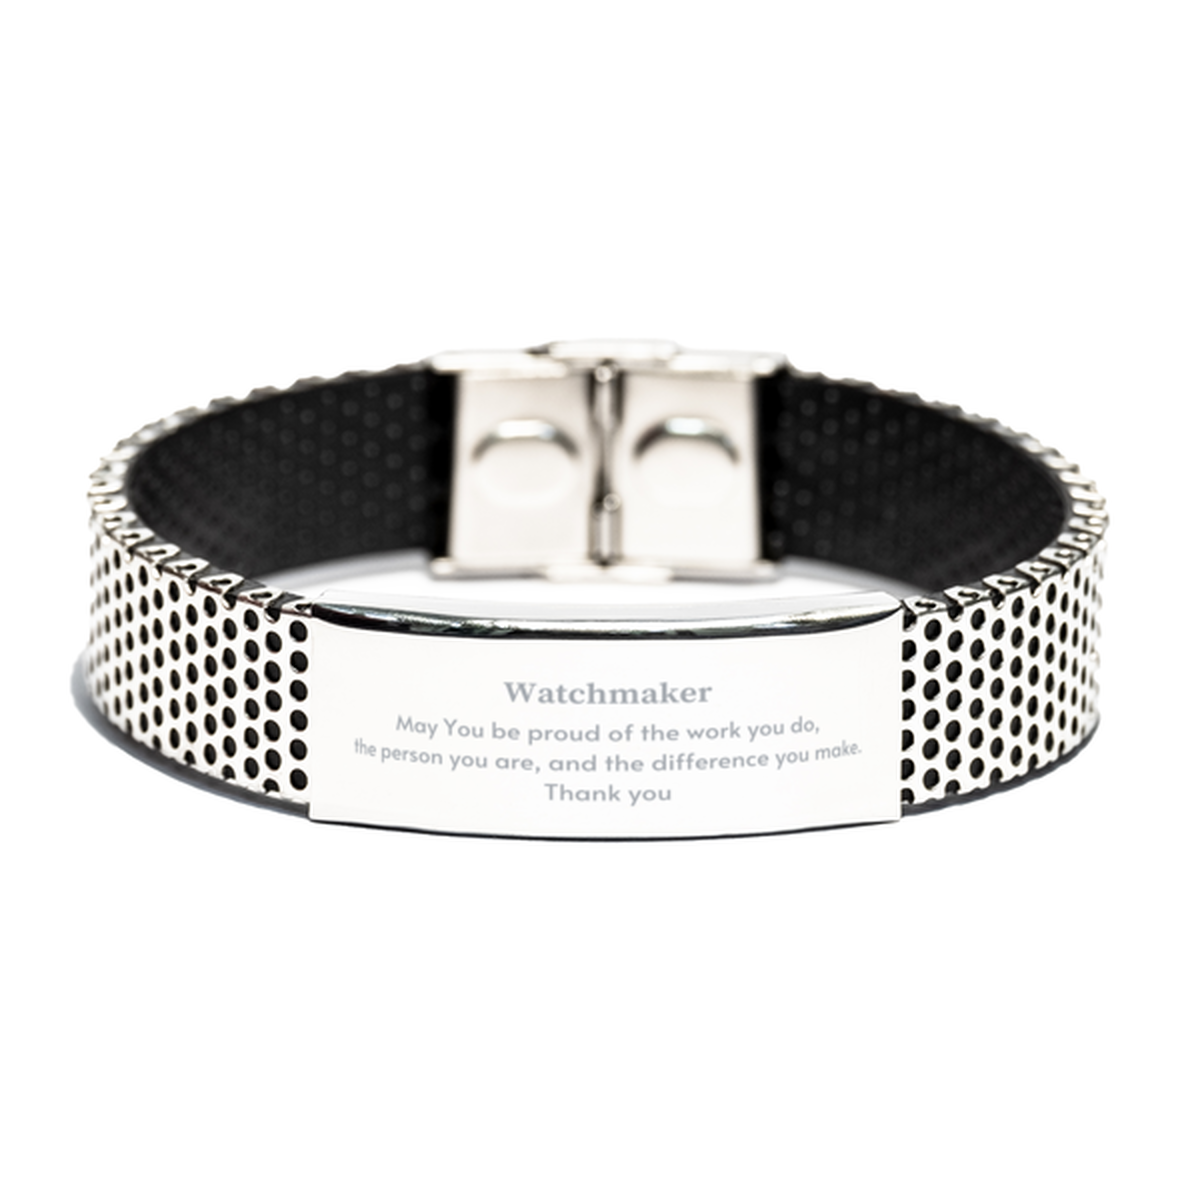 Heartwarming Stainless Steel Bracelet Retirement Coworkers Gifts for Watchmaker, Watchmaker May You be proud of the work you do, the person you are Gifts for Boss Men Women Friends